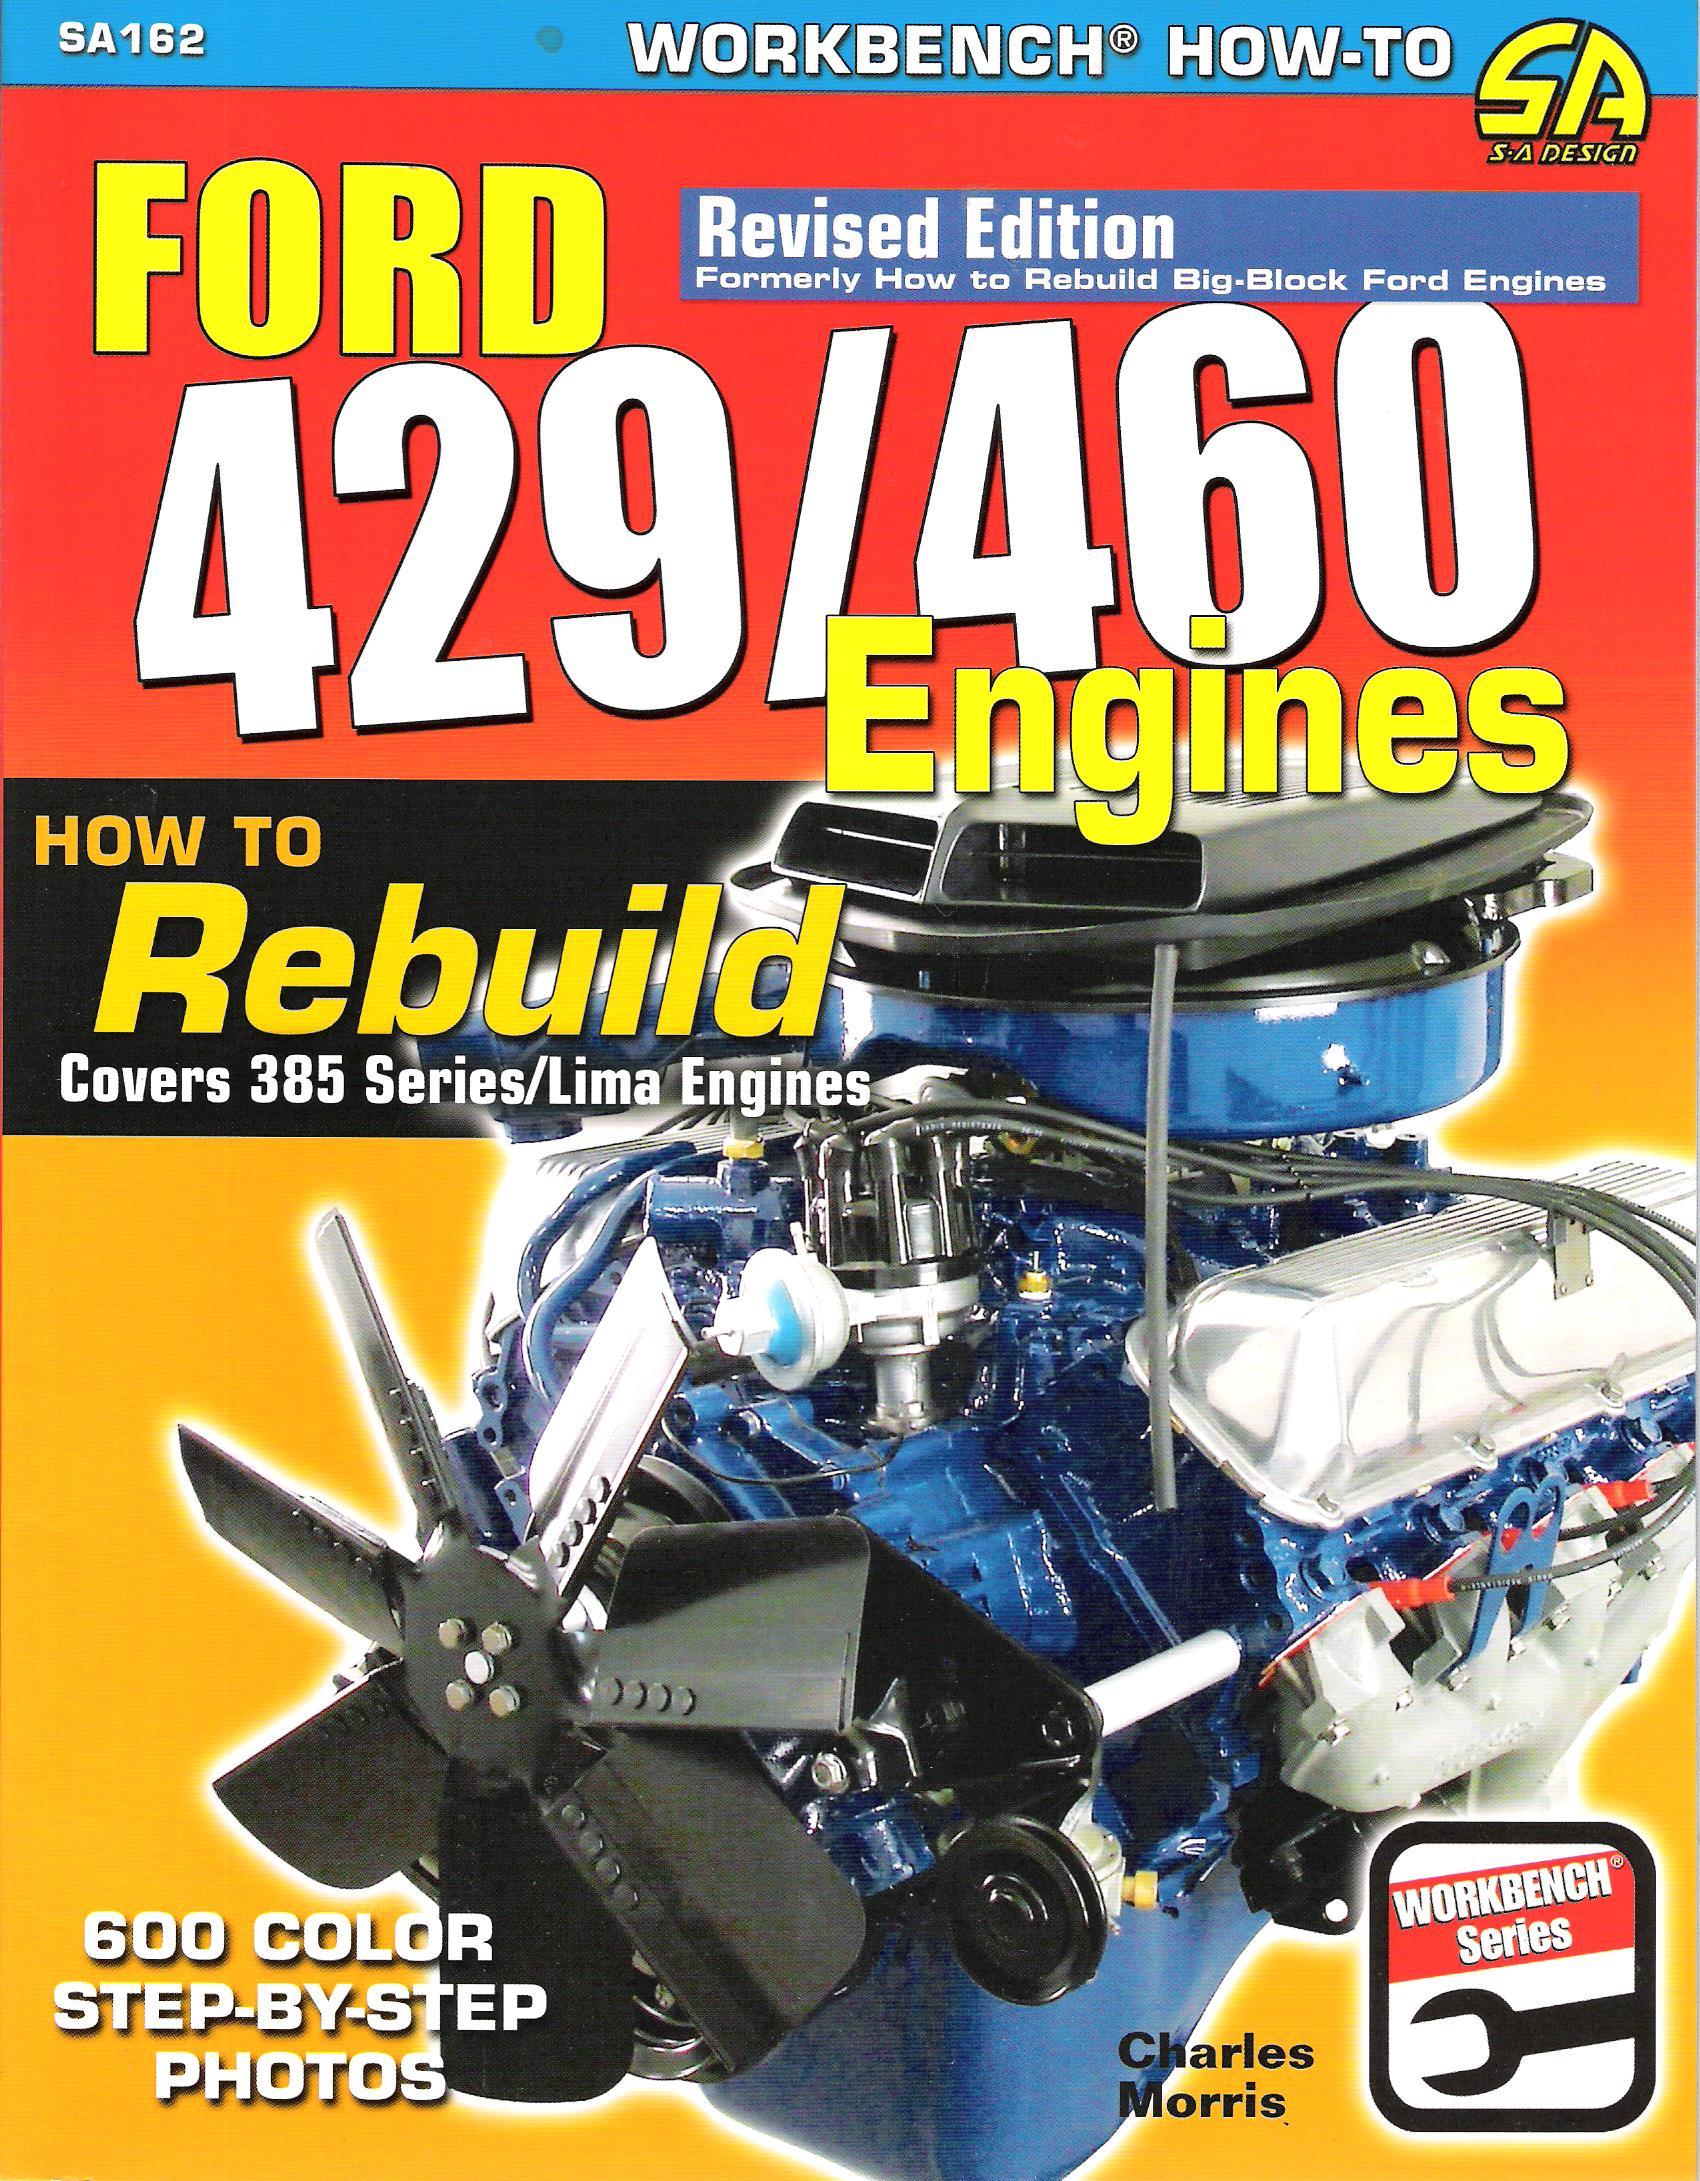 How to Rebuild Ford 429 460 Covers 385 Seires Lima Engines Workbench book SA162